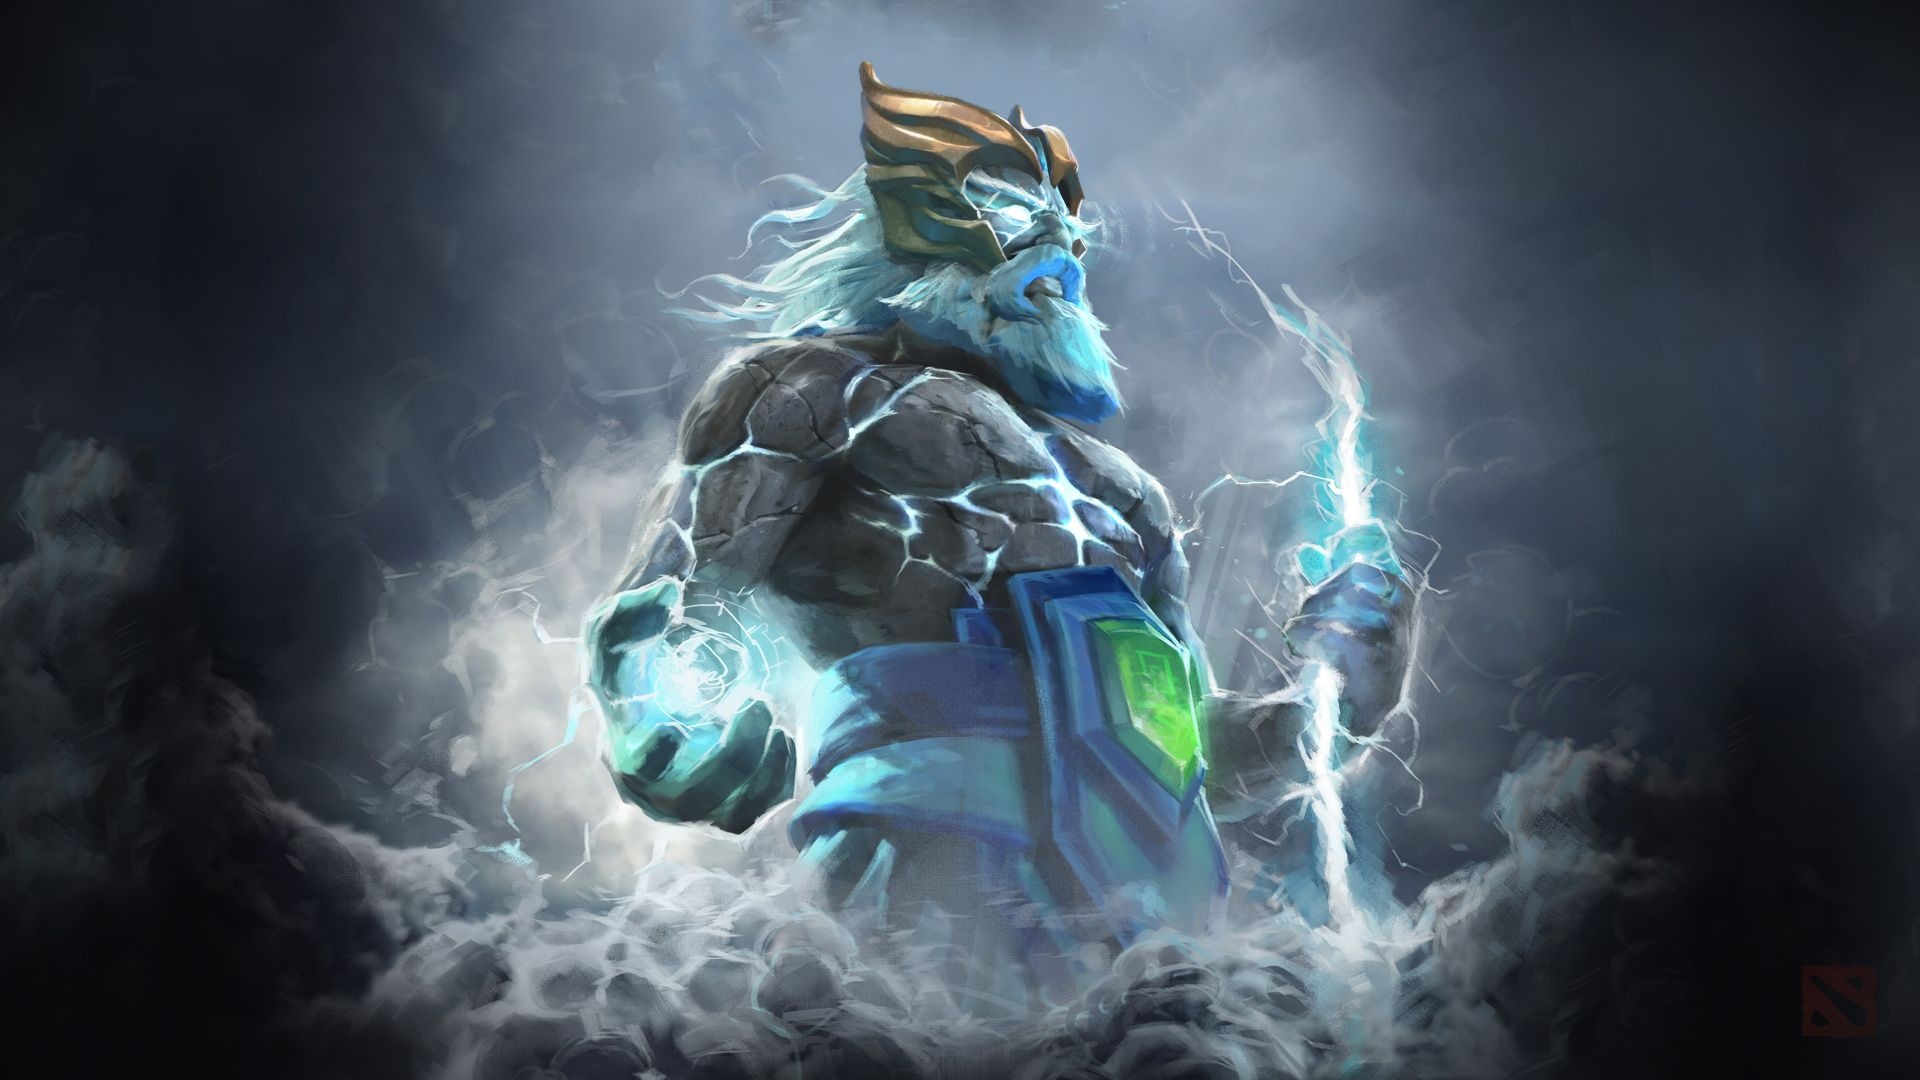 Zeus: Tempest Helm of the Thundergod, Arcana set in Dota 2 MOBA video game. 1920x1080 Full HD Background.